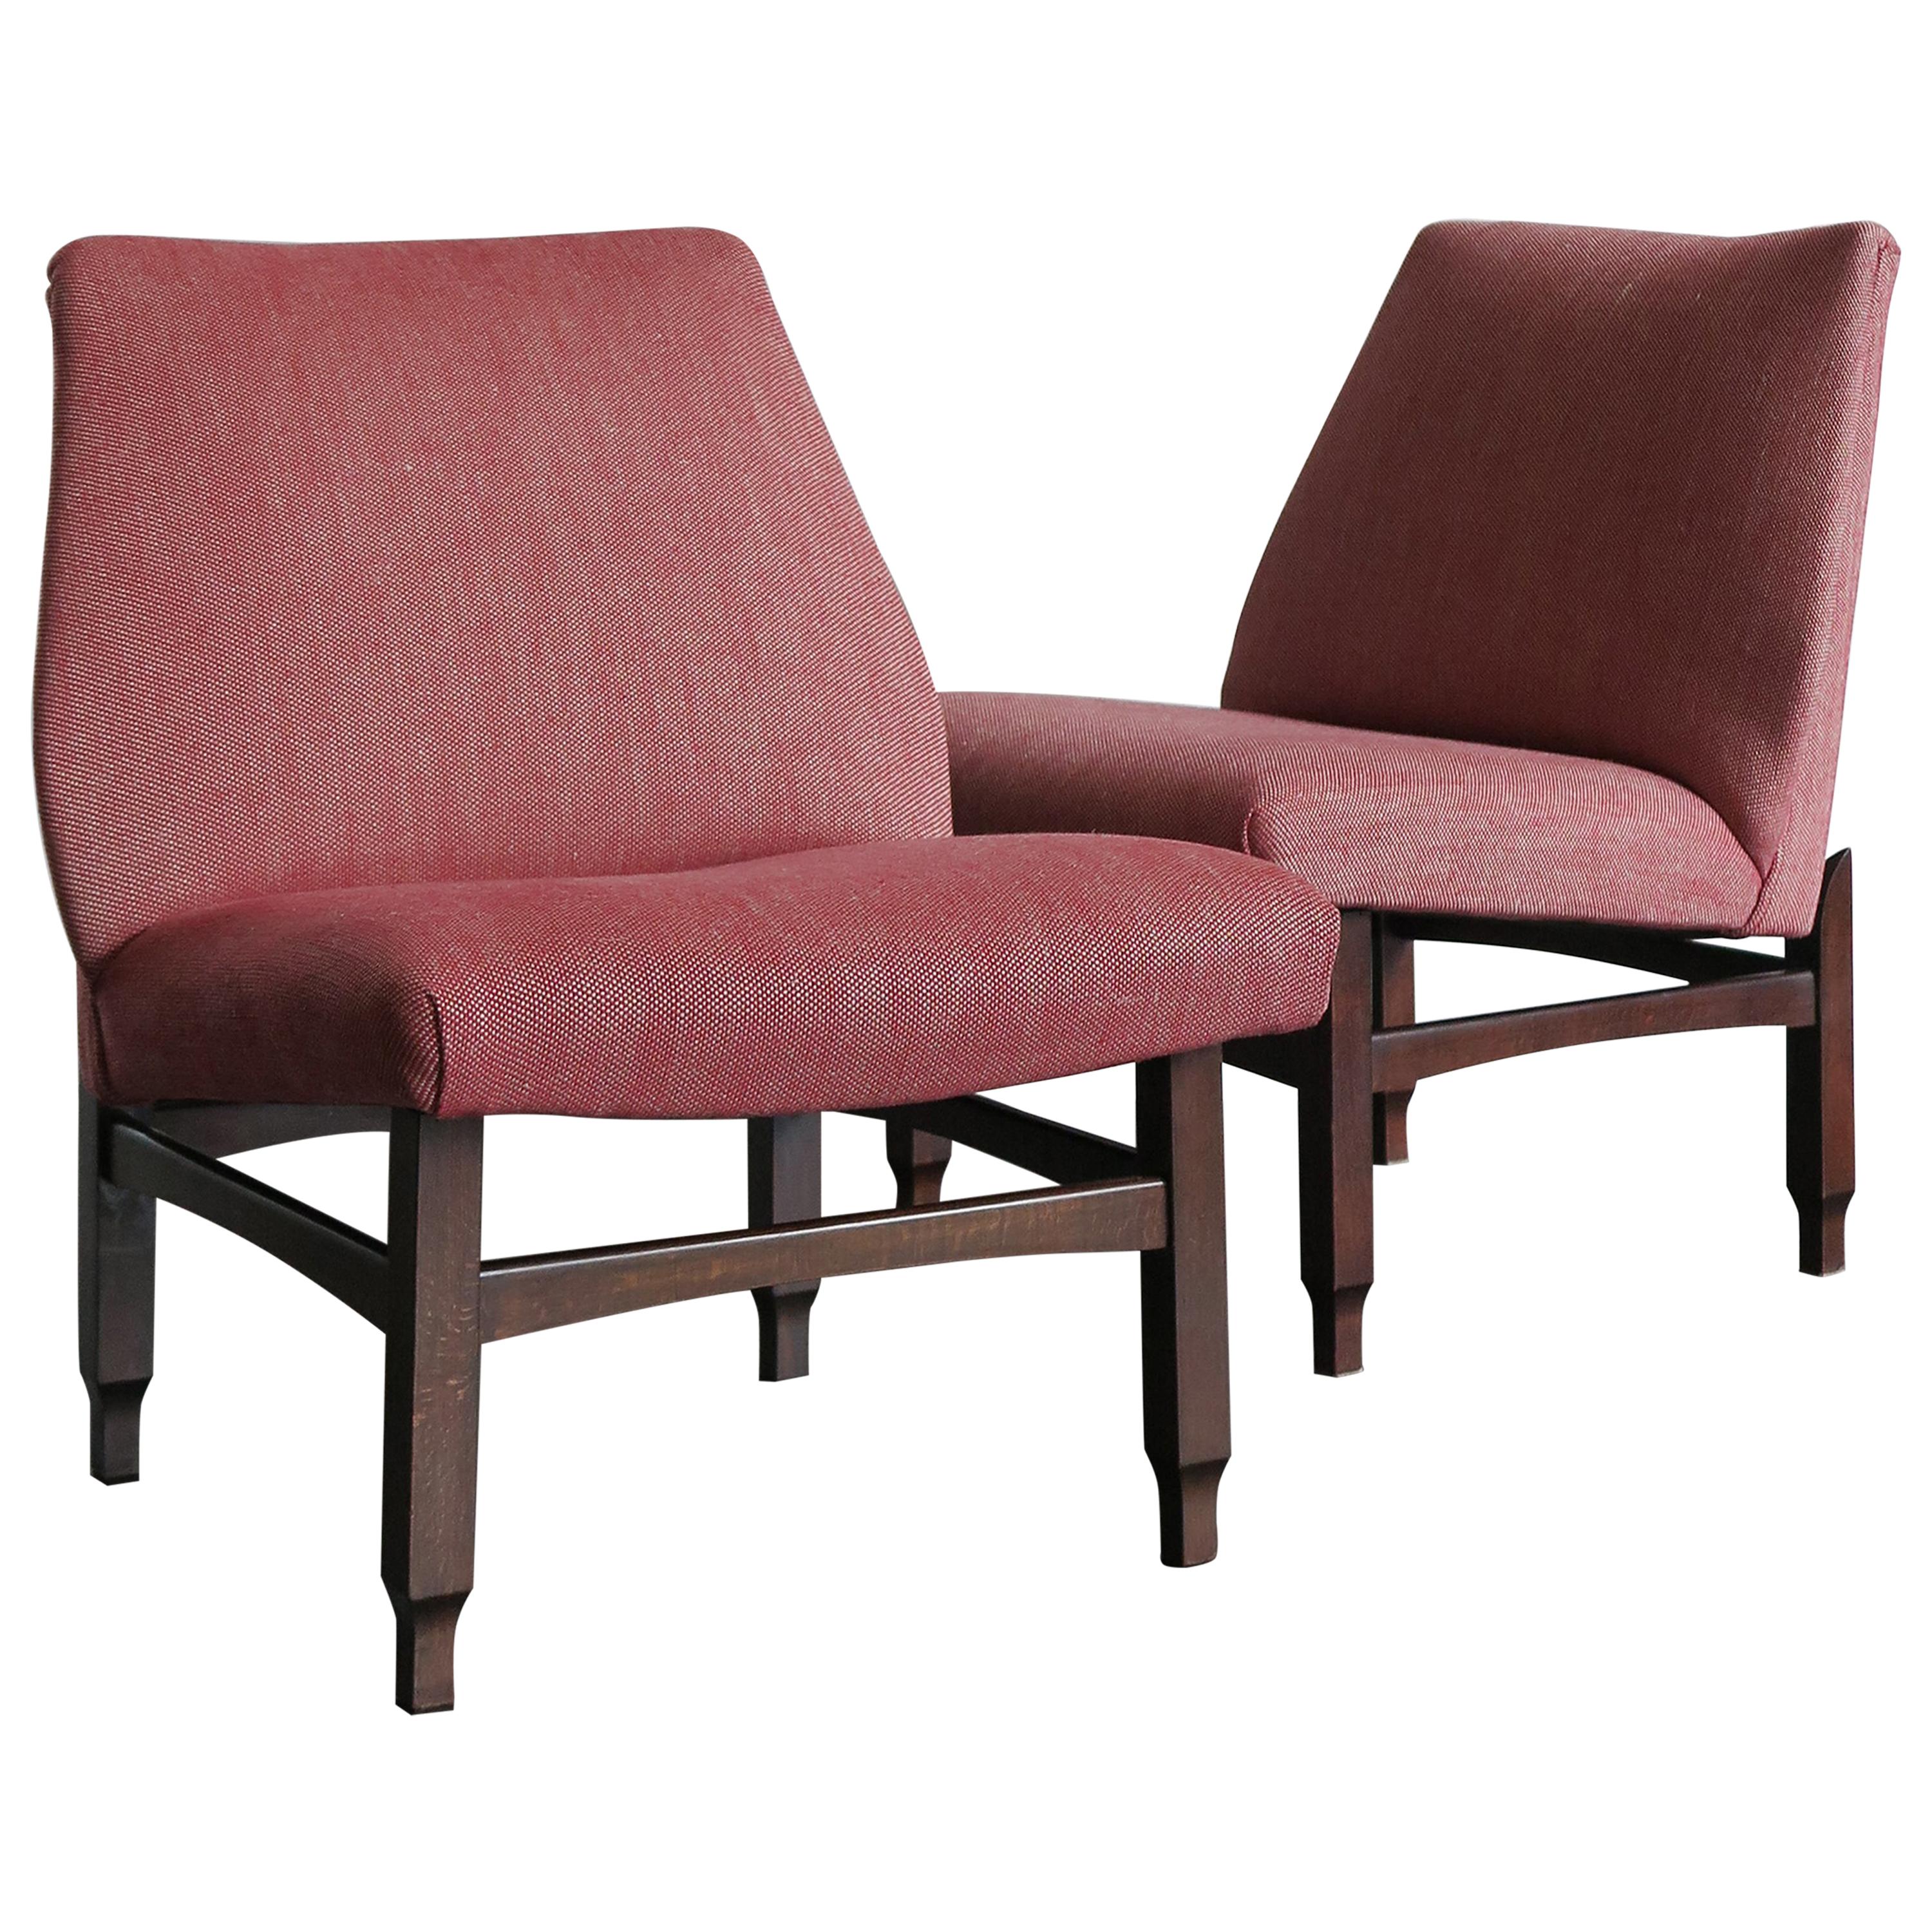 Italian Midcentury Modern Design Wood and Red Fabric Armchairs, 1950s